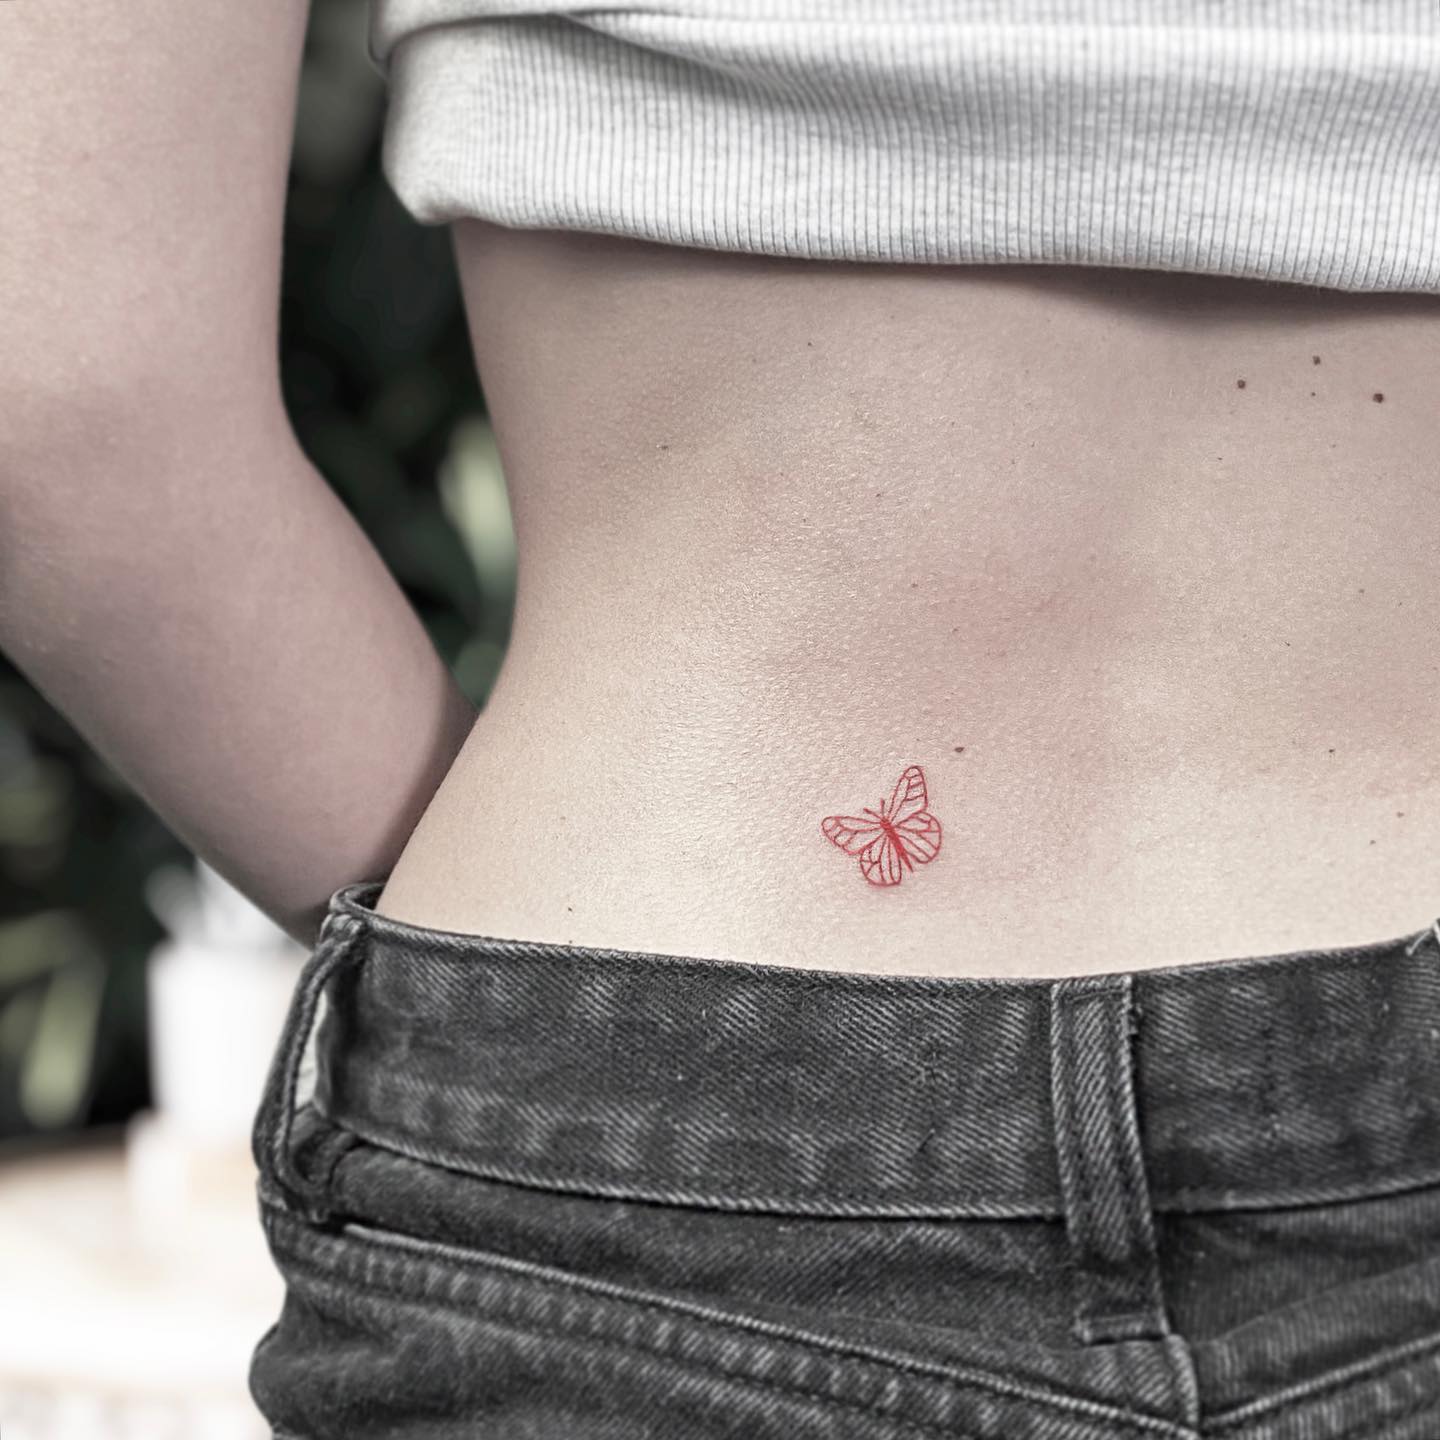 Red butterfly tattoo on back